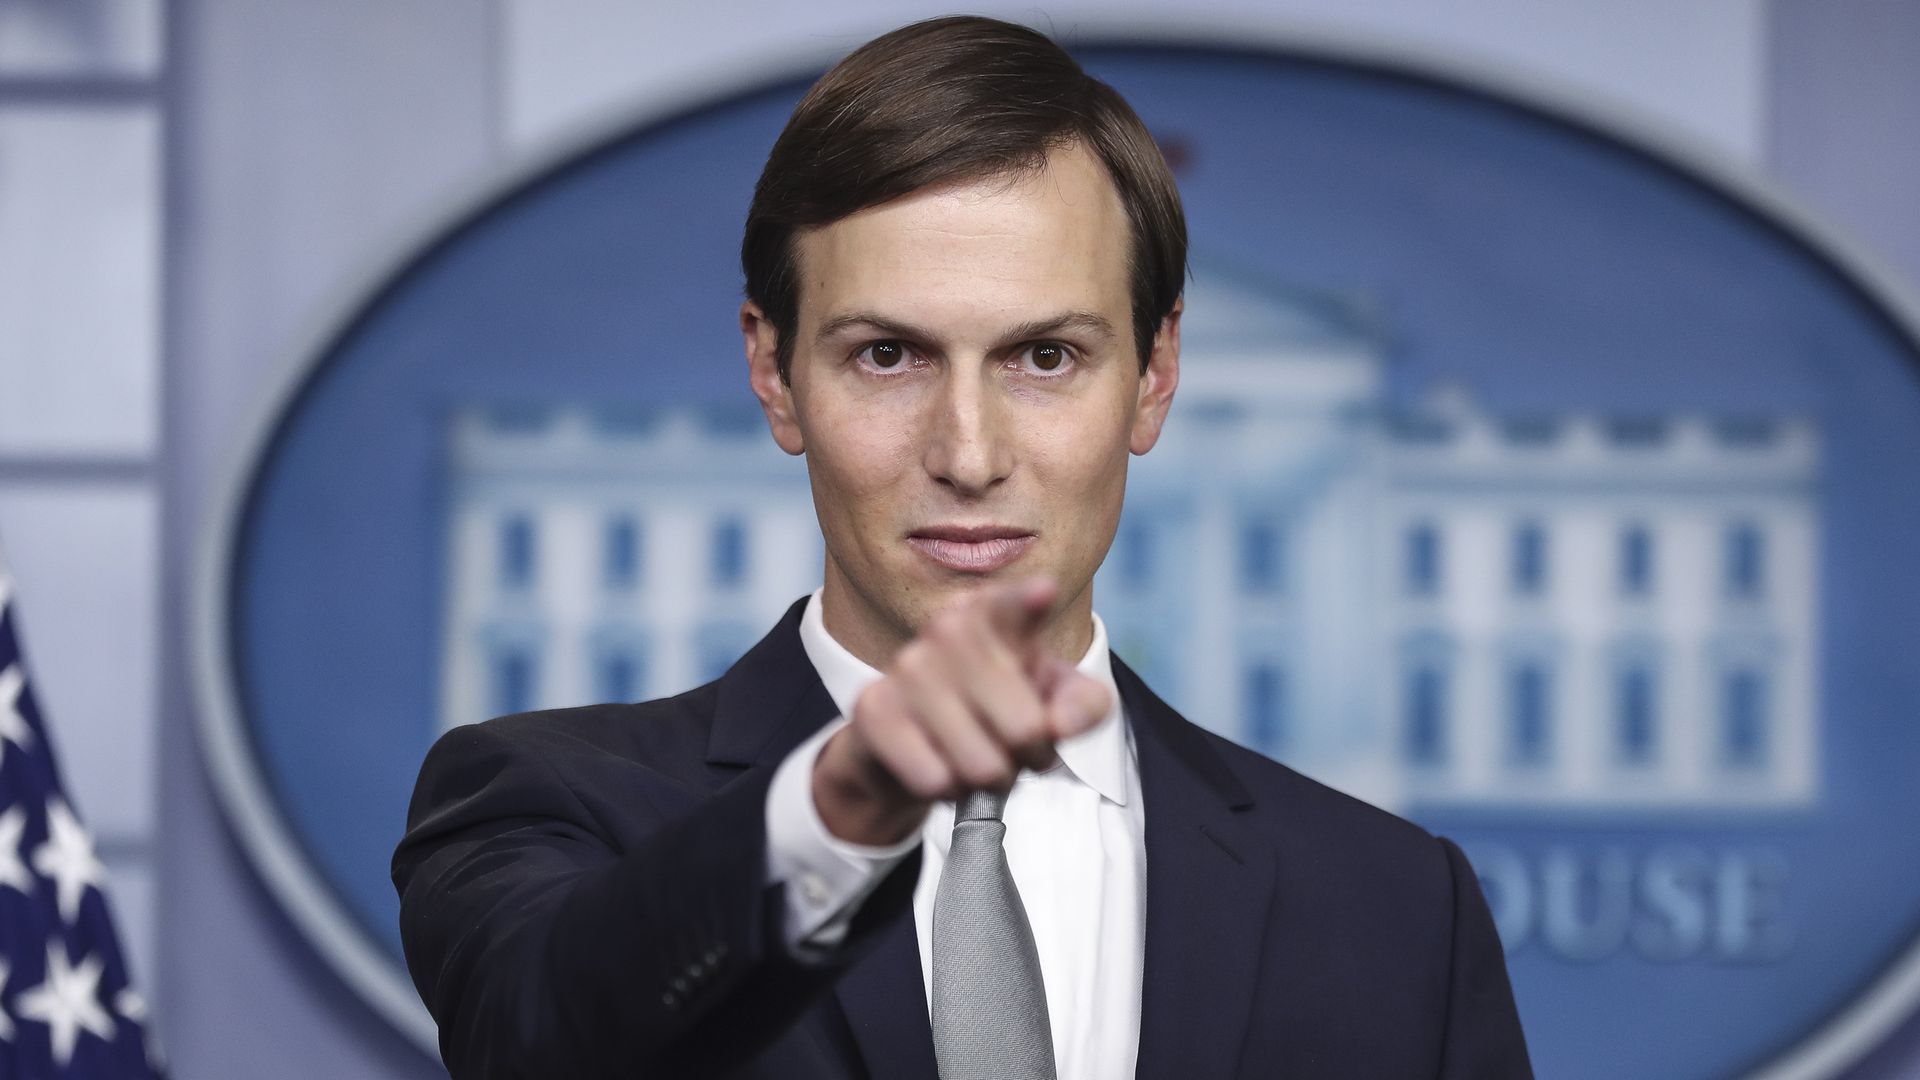 Jared Kushner, senior White House adviser, speaks during a news conference in the James S. Brady Press Briefing Room at the White House in Washington, D.C